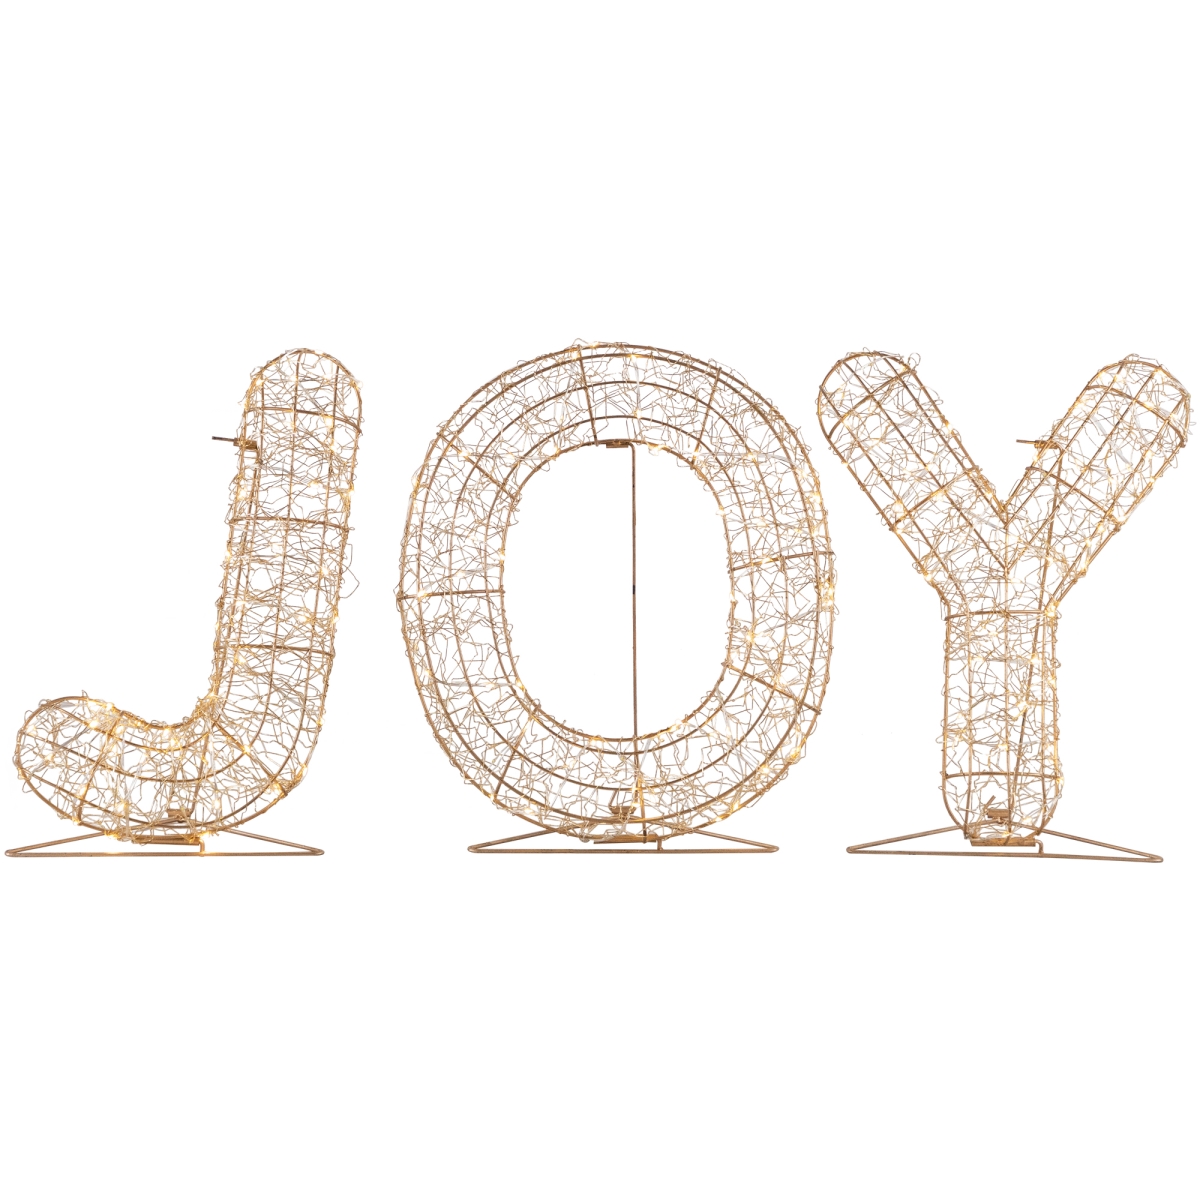 Northlight 35681665 16 in. LED Twinkle Lighted Gold Metal Wire Joy Sign Outdoor Christmas Decoration